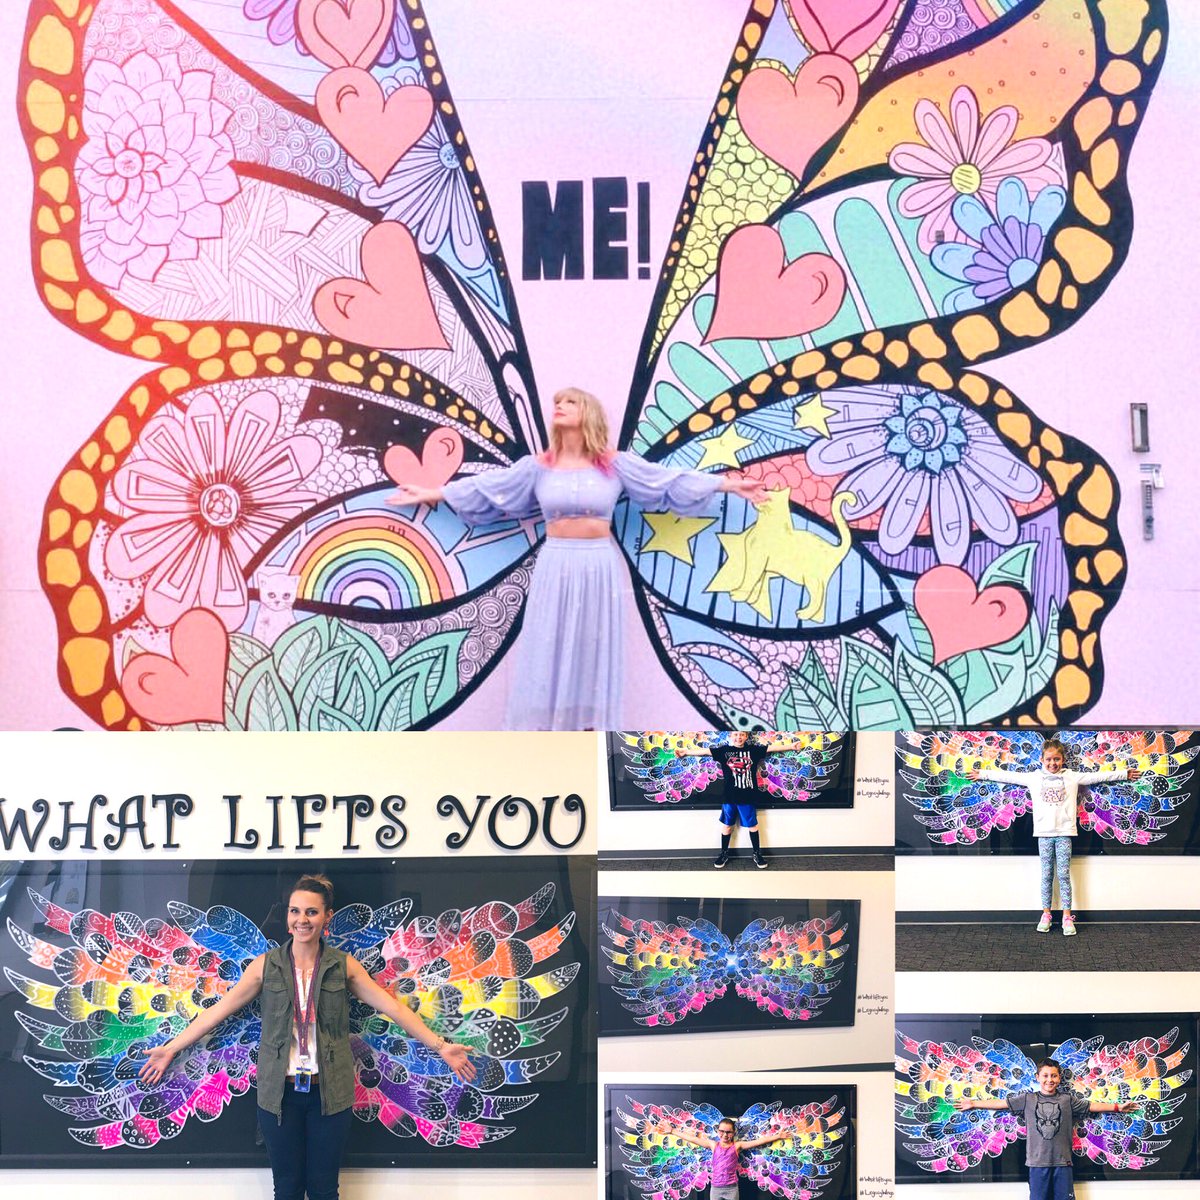 T-Swift has a new song out... and I couldn’t love it more!! Celebrating all things that make you, YOU!! Taking the time to let your kids passions shine is what it’s all about!  #legacywings #kelseymontagueart #whatliftsyou #StVrainStorm #Fredericklearns